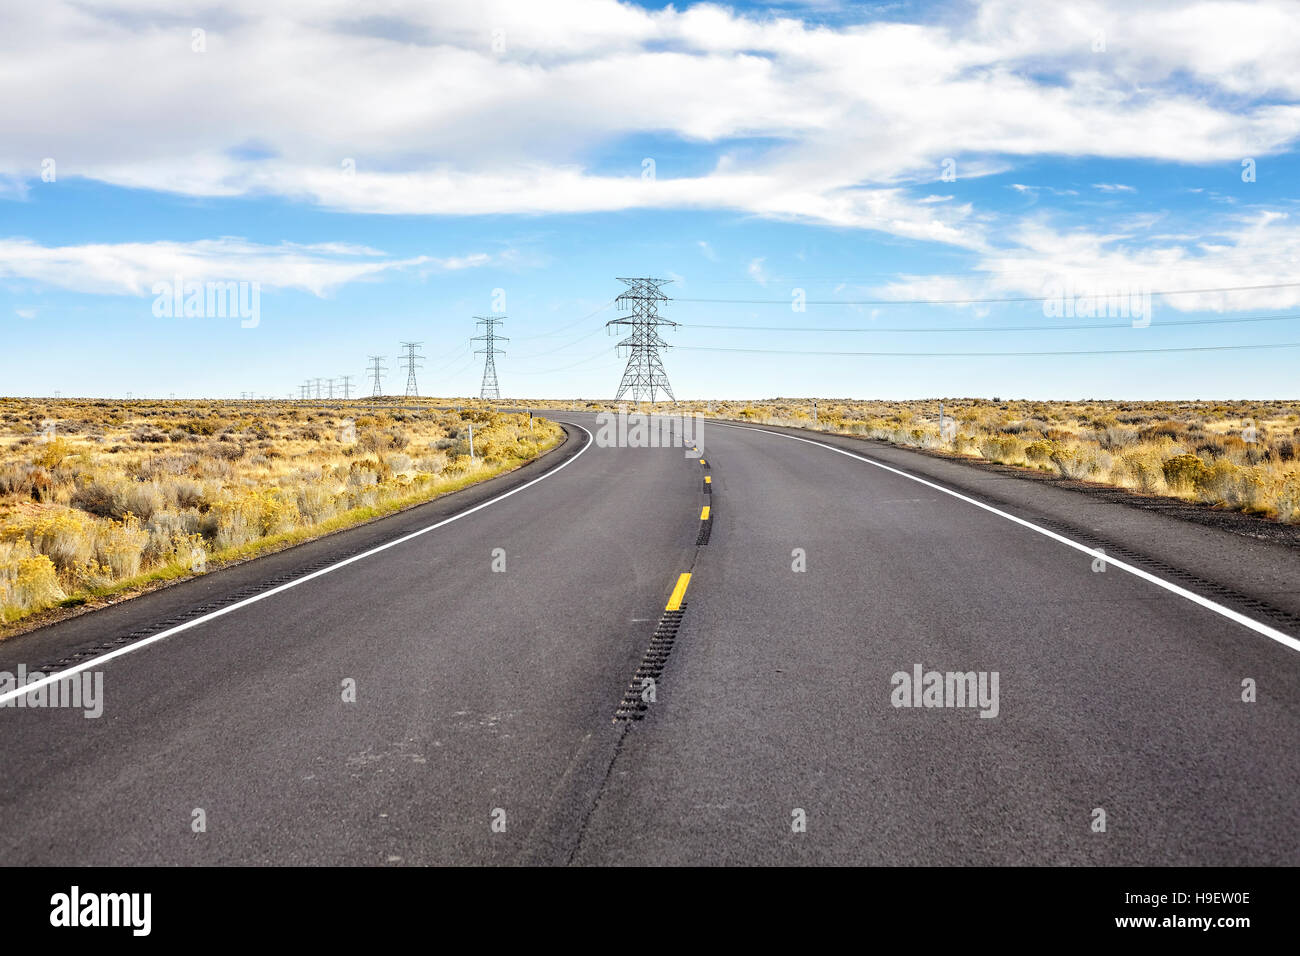 An empty rural highway with electric poles. Stock Photo